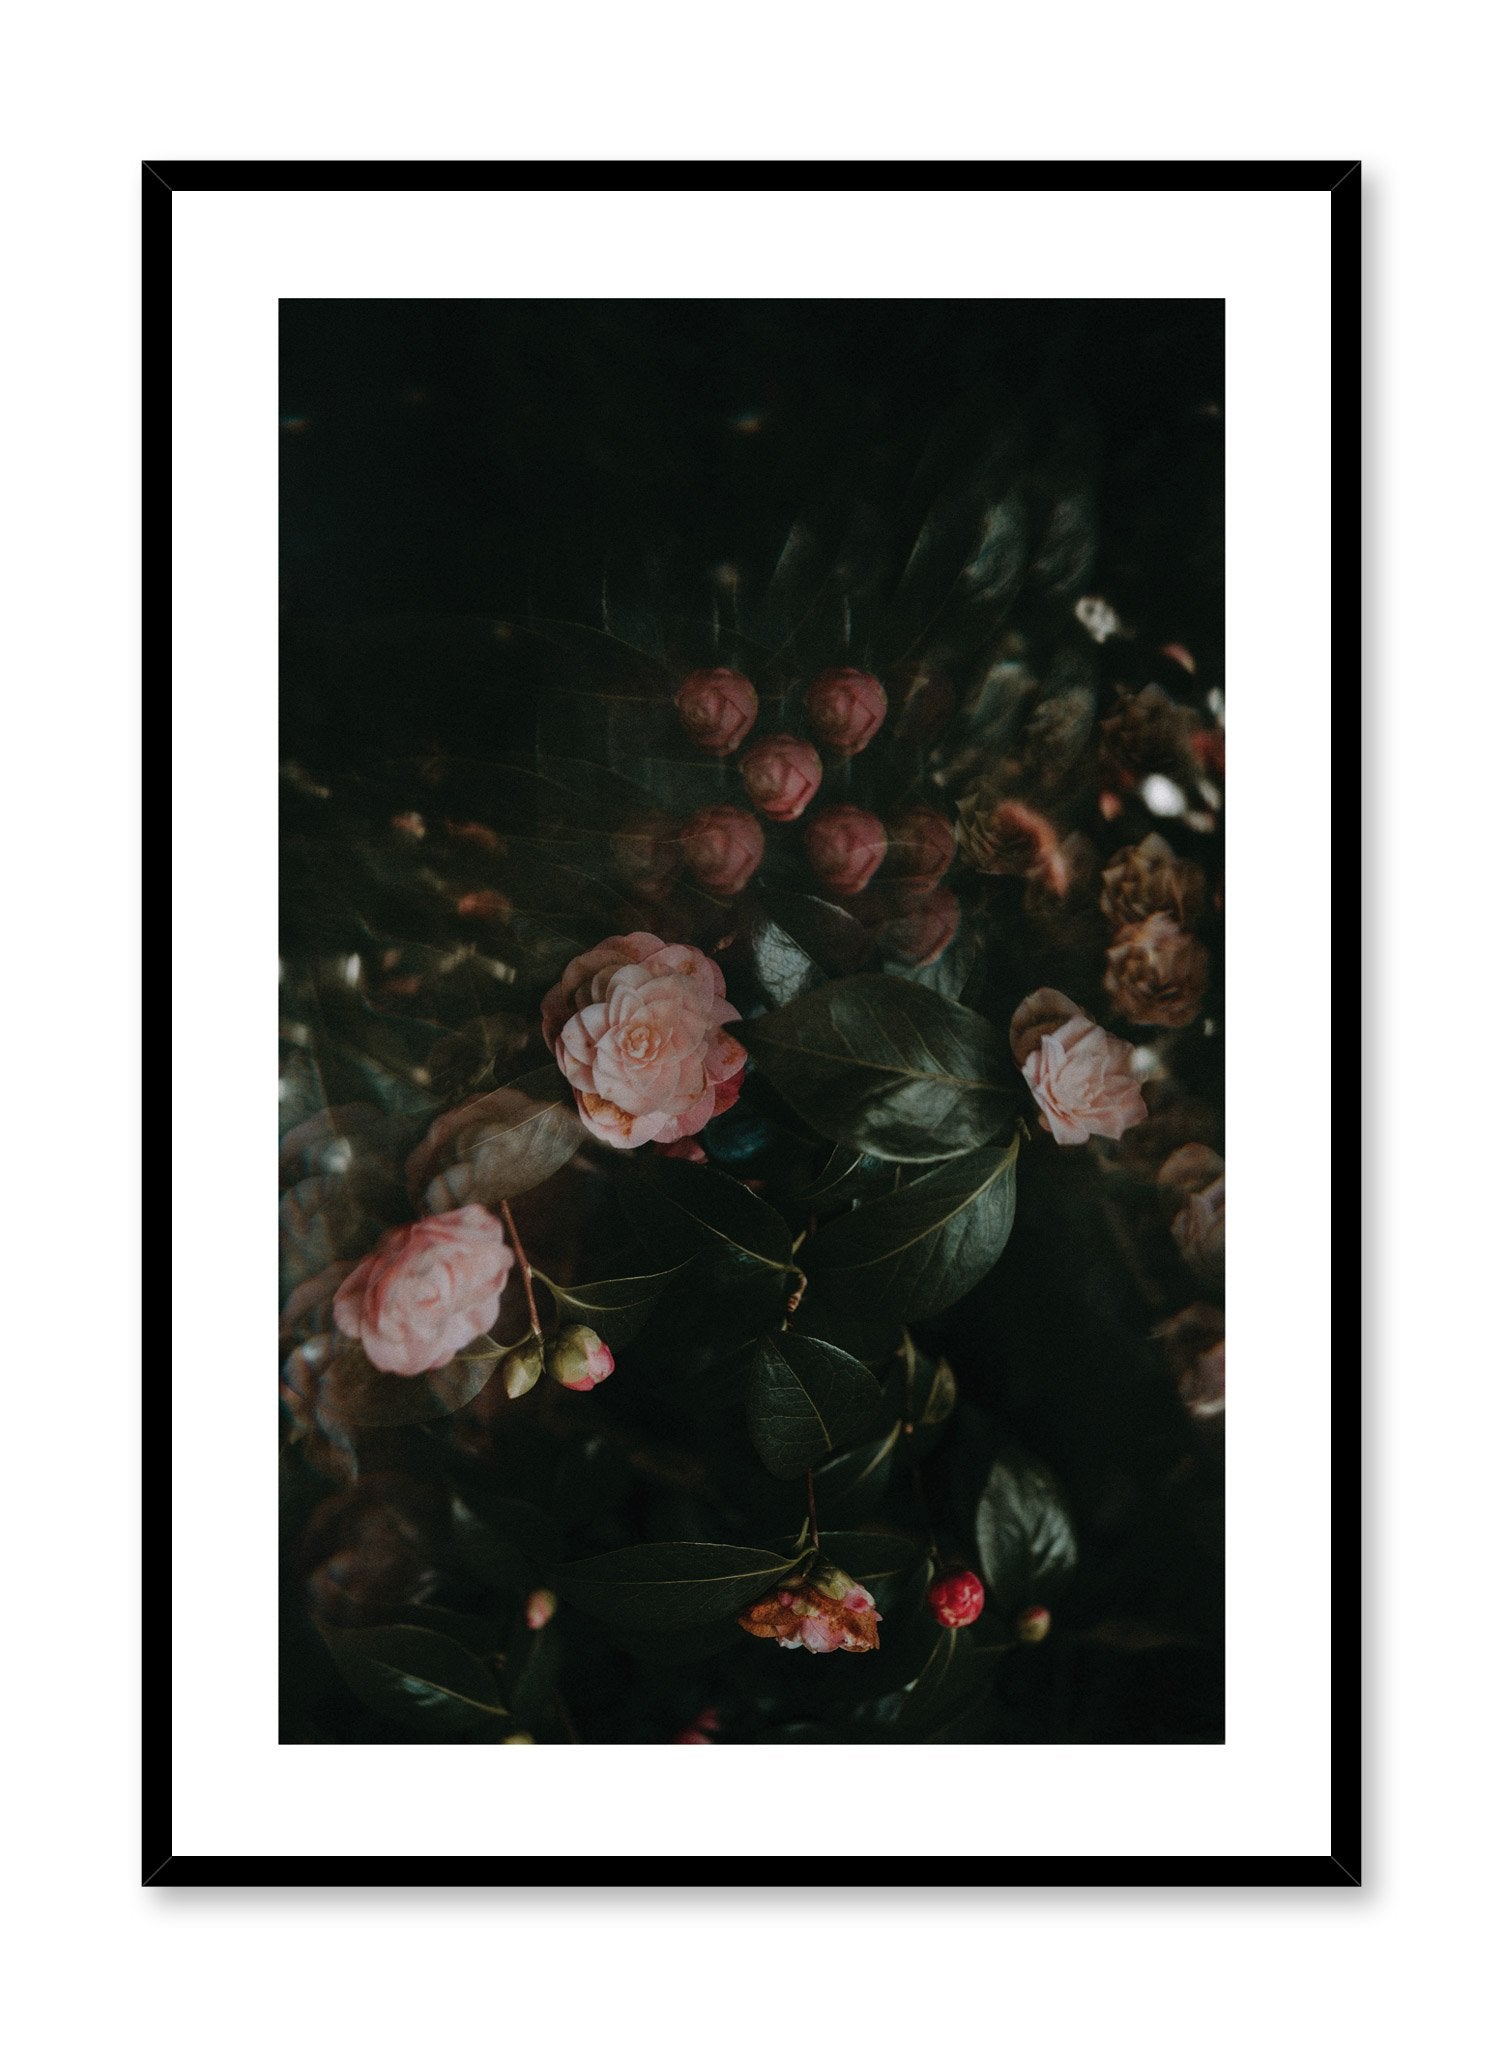 "Rose Drama" is a flower photography poster by Opposite Wall of pink roses and green leaves in a dark setting. 